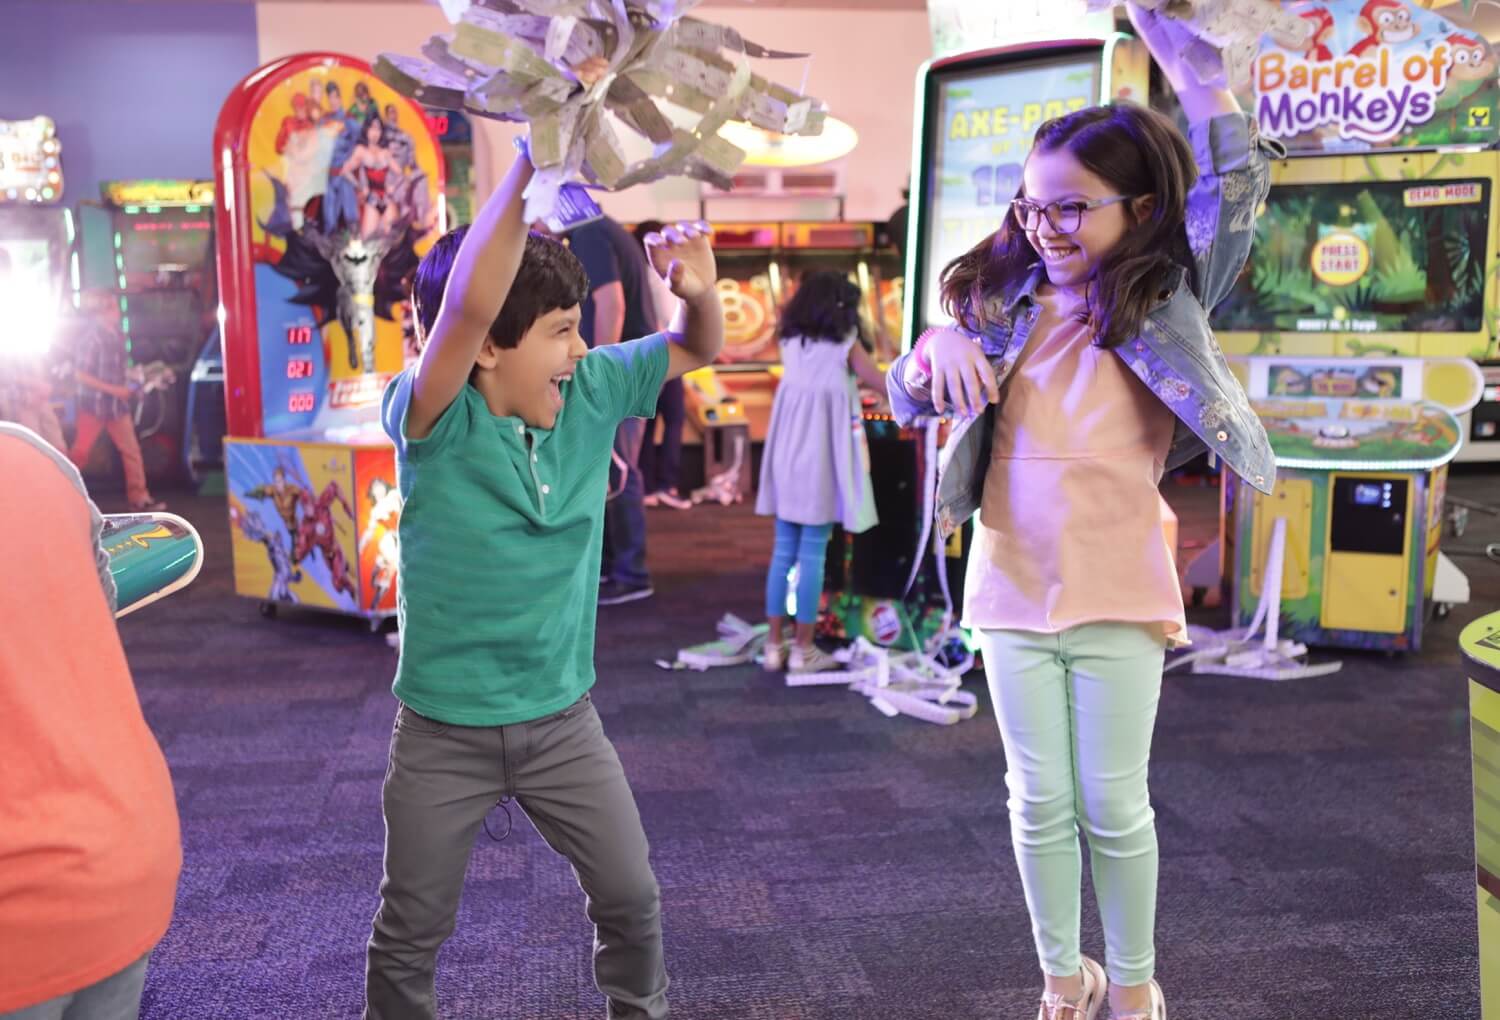 Two kids dancing while holding tickets